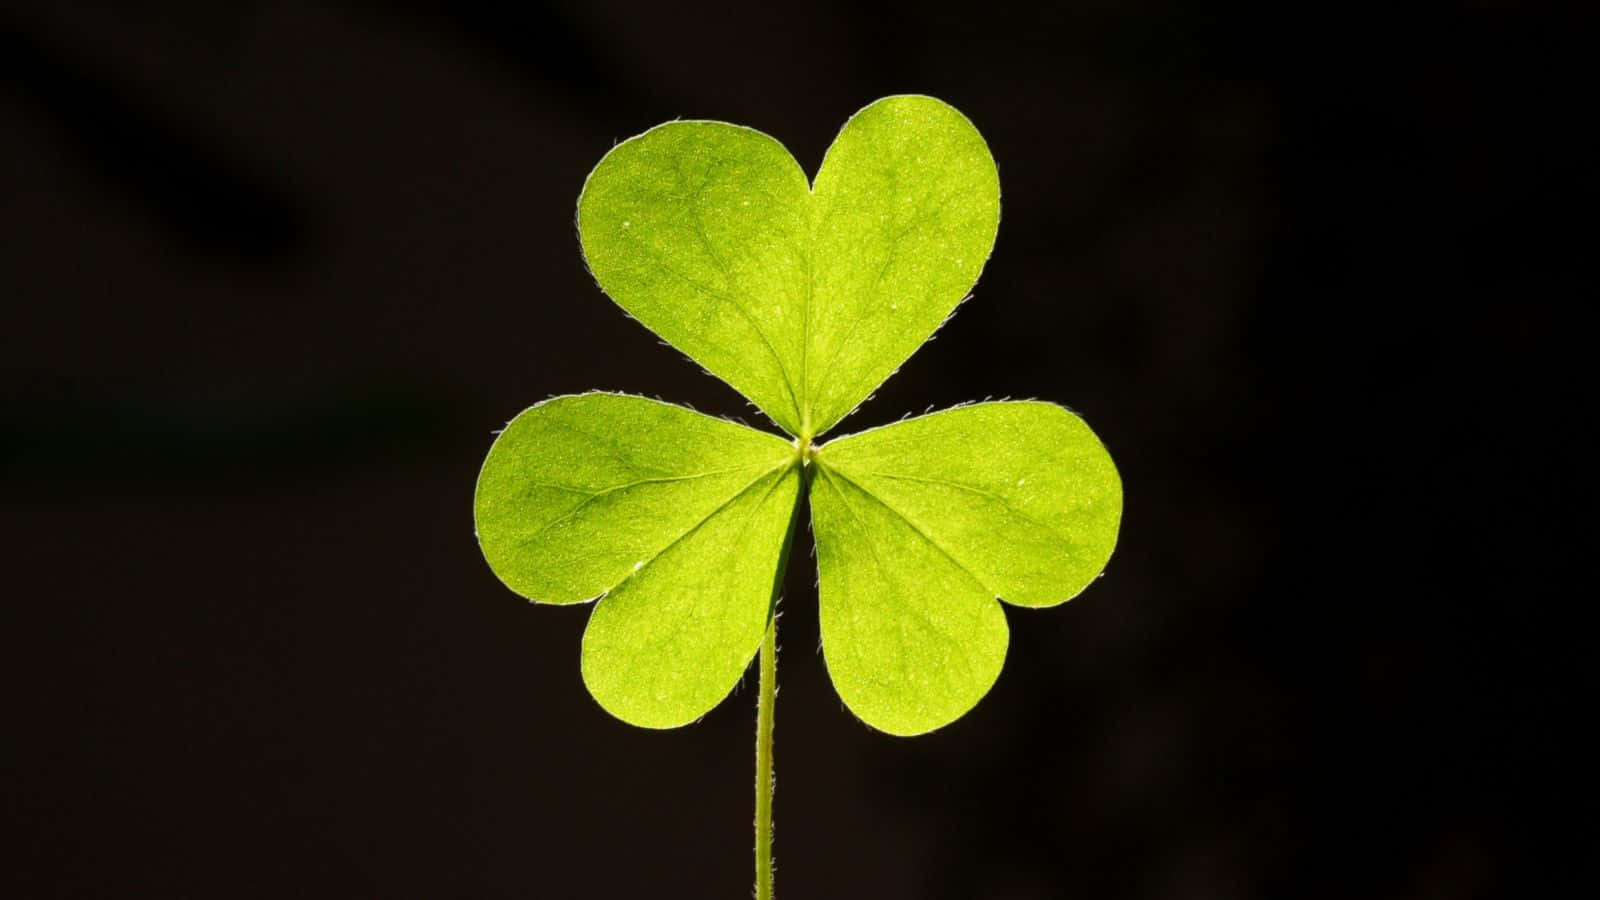 The Luckiest of Plants - A Four Leaf Clover